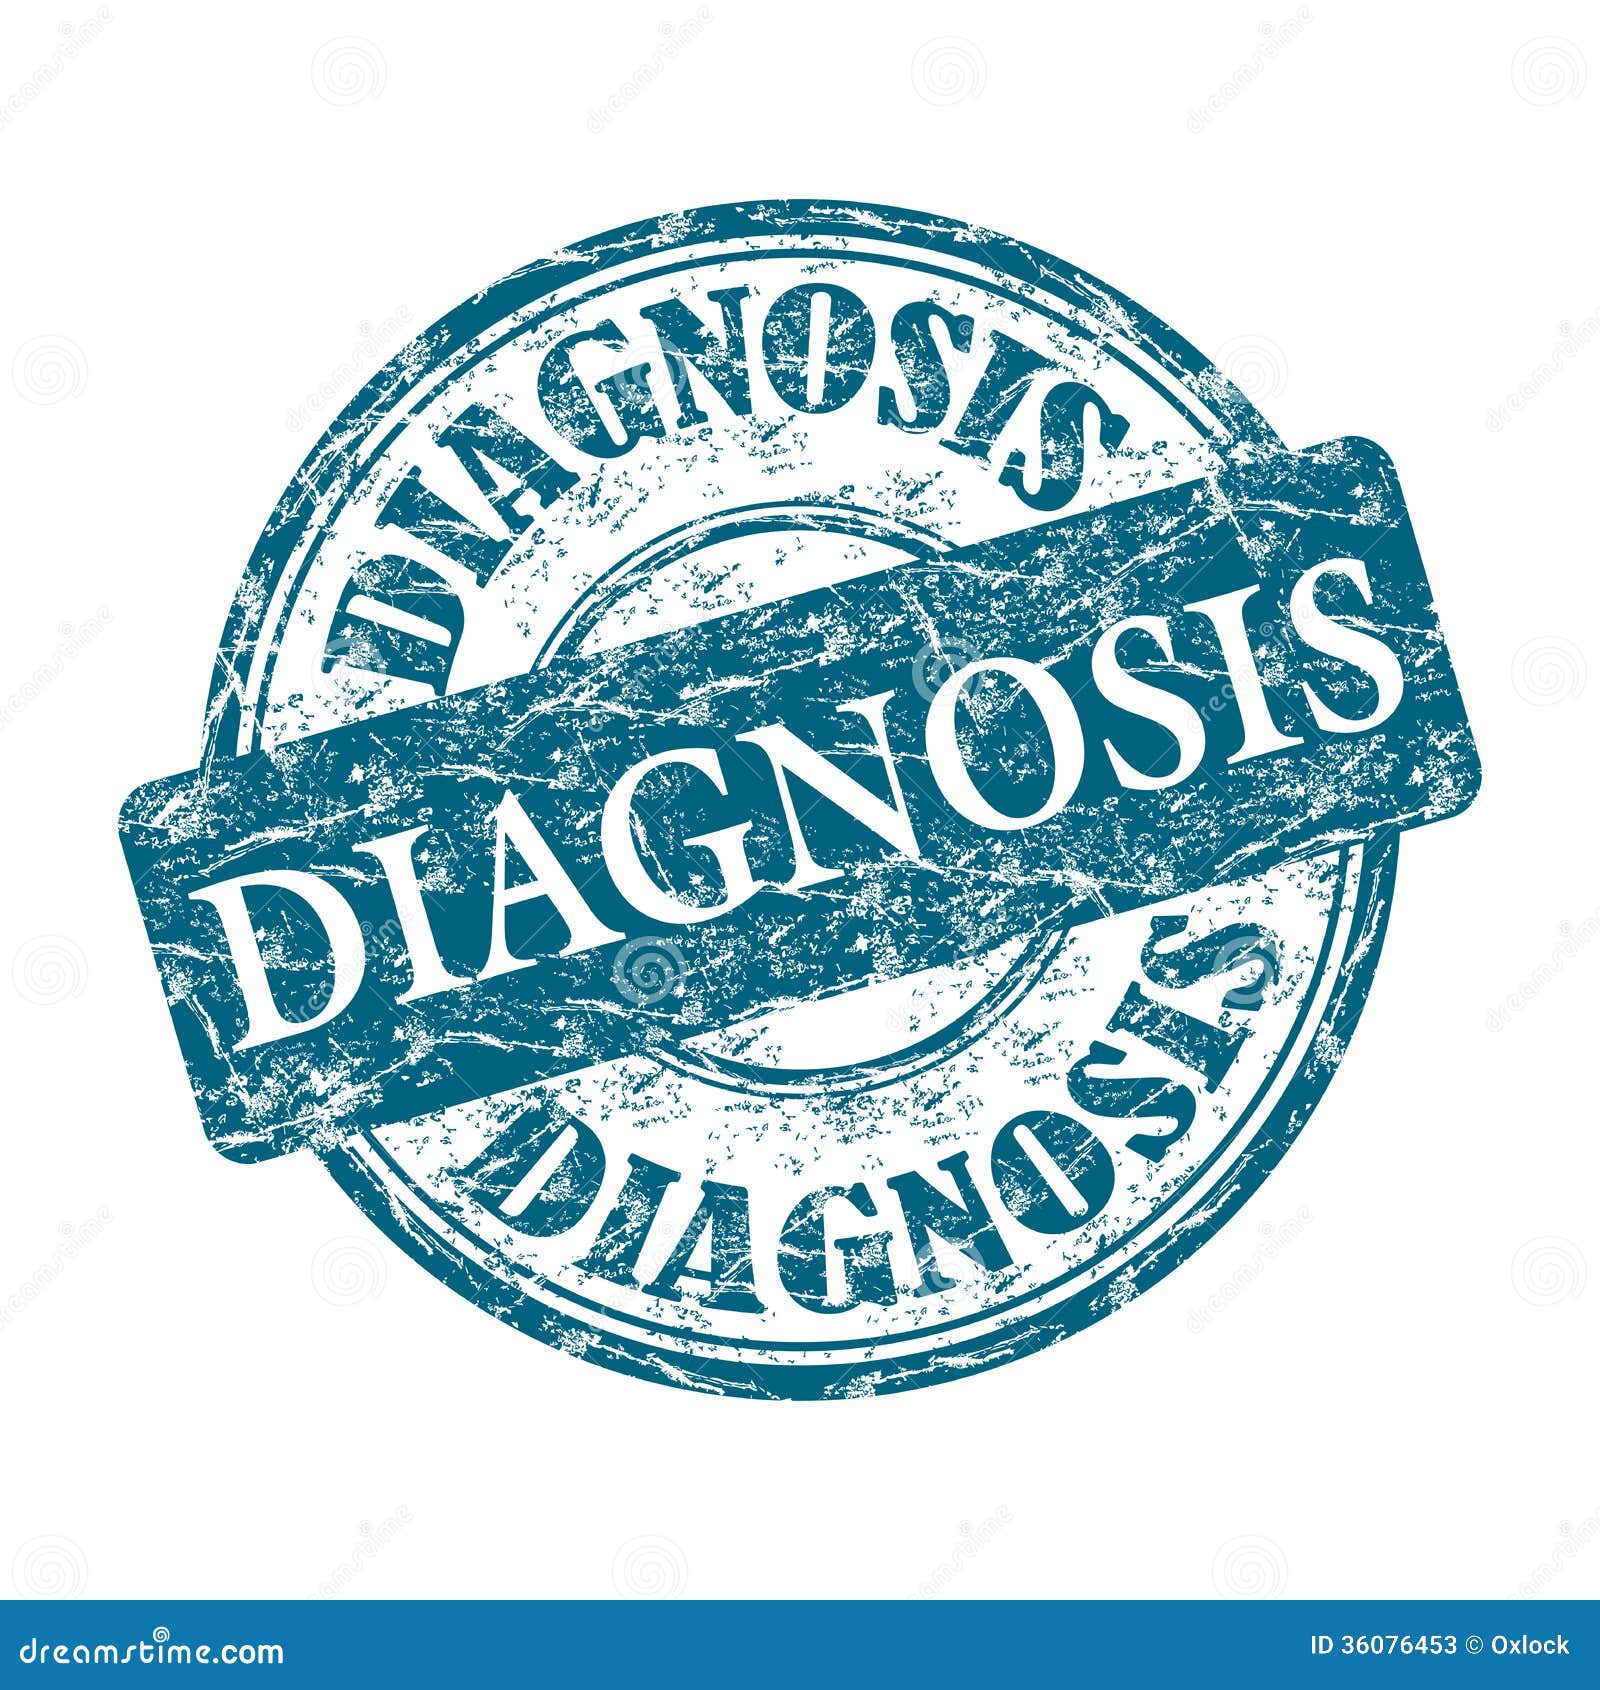 diagnosis grunge rubber stamp